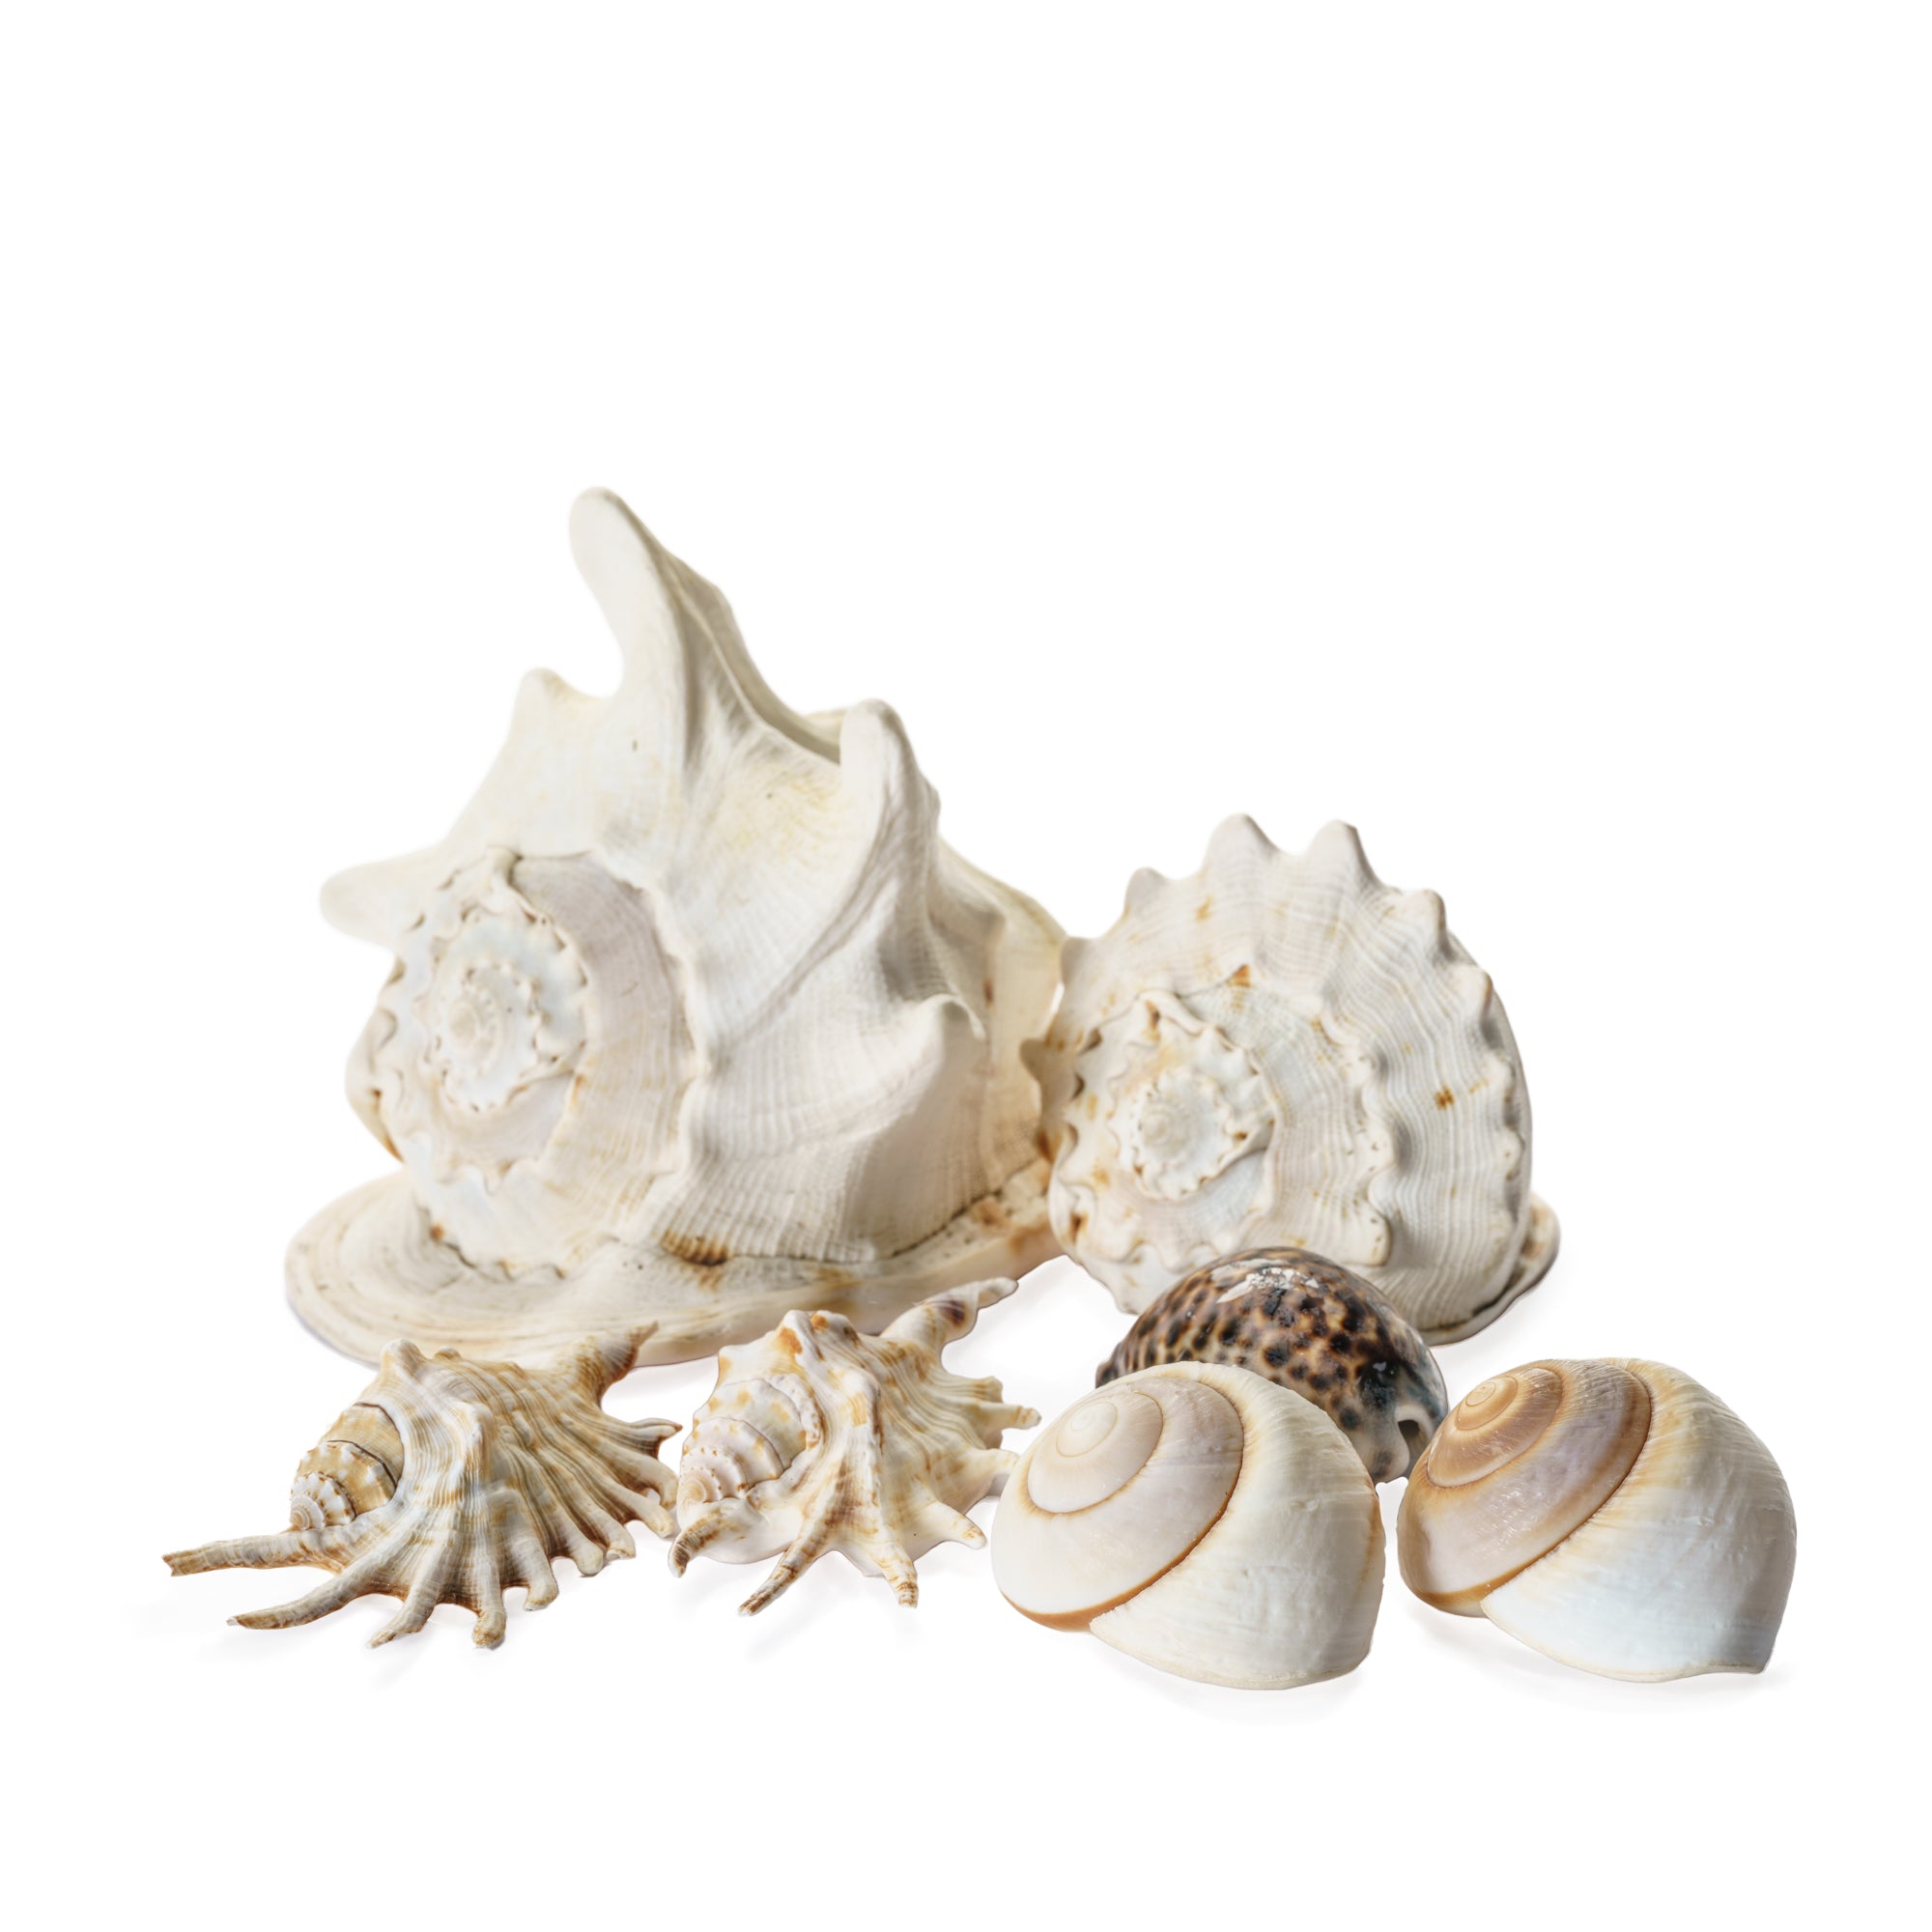 Assortment of shells for hire | For Love & Living Gold Coast Wedding & Event Hire